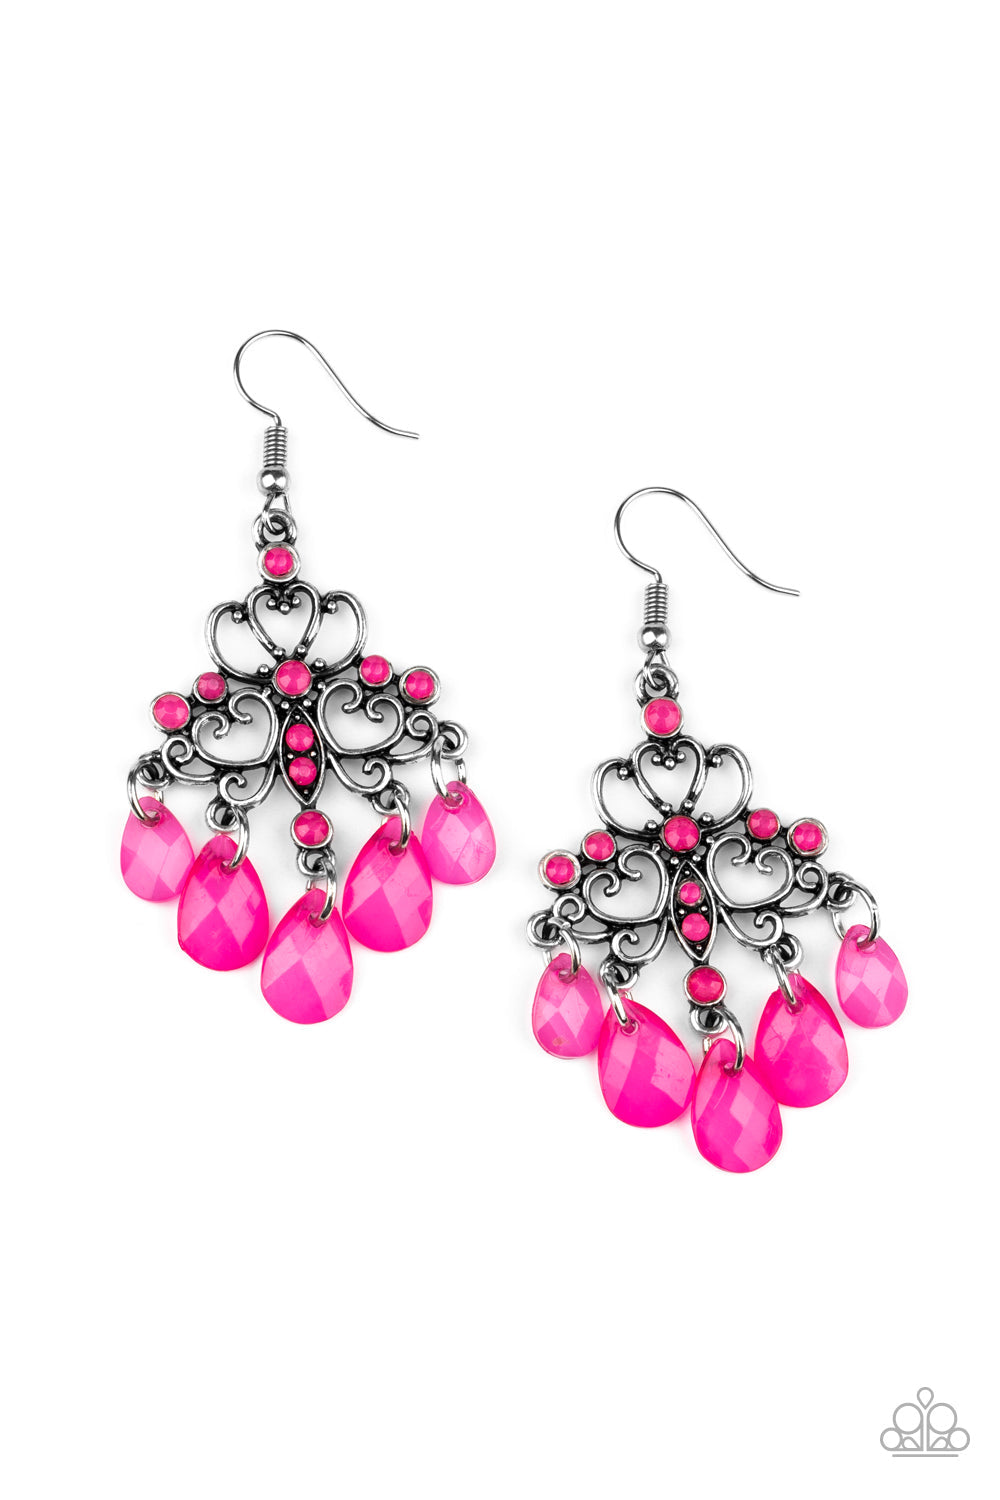 Dip It GLOW - Pink and Silver Fashion Earrings - Paparazzi Accessories - Cloudy pink teardrops swing from the bottom of an ornate silver frame radiating with dainty pink rhinestones for a whimsical look. Earring attaches to a standard fishhook fitting. Sold as one pair of earrings.